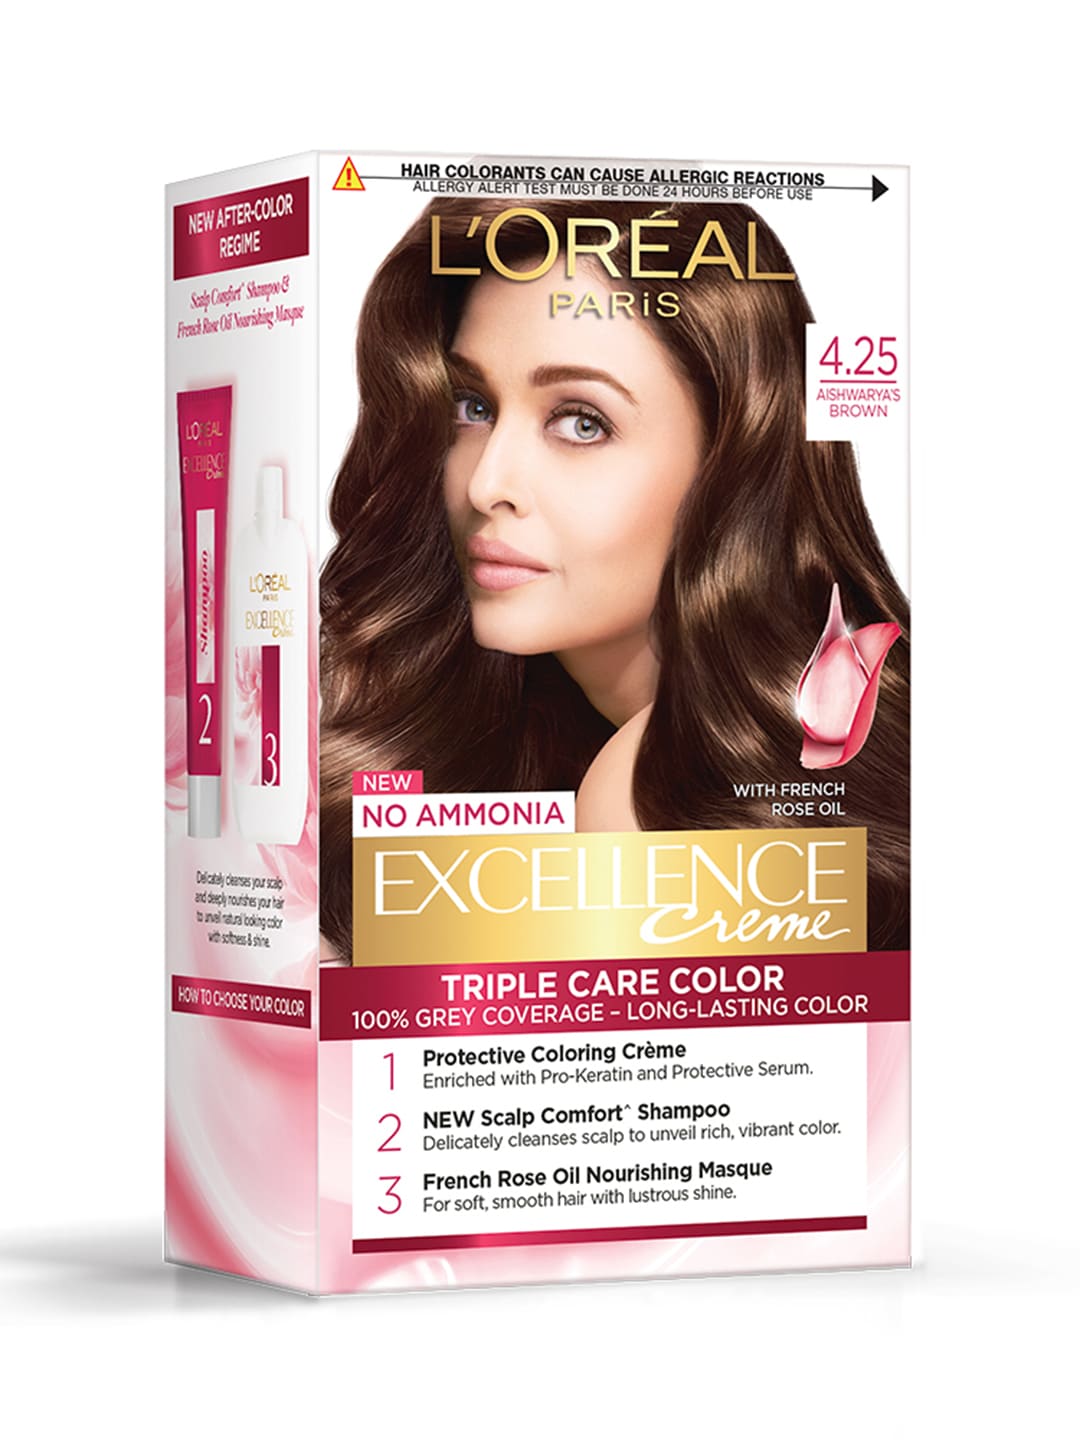 LOreal Paris Excellence Creme Triple Care Hair Color 72ml+100g - Aishwarya's Brown 4.25 Price in India